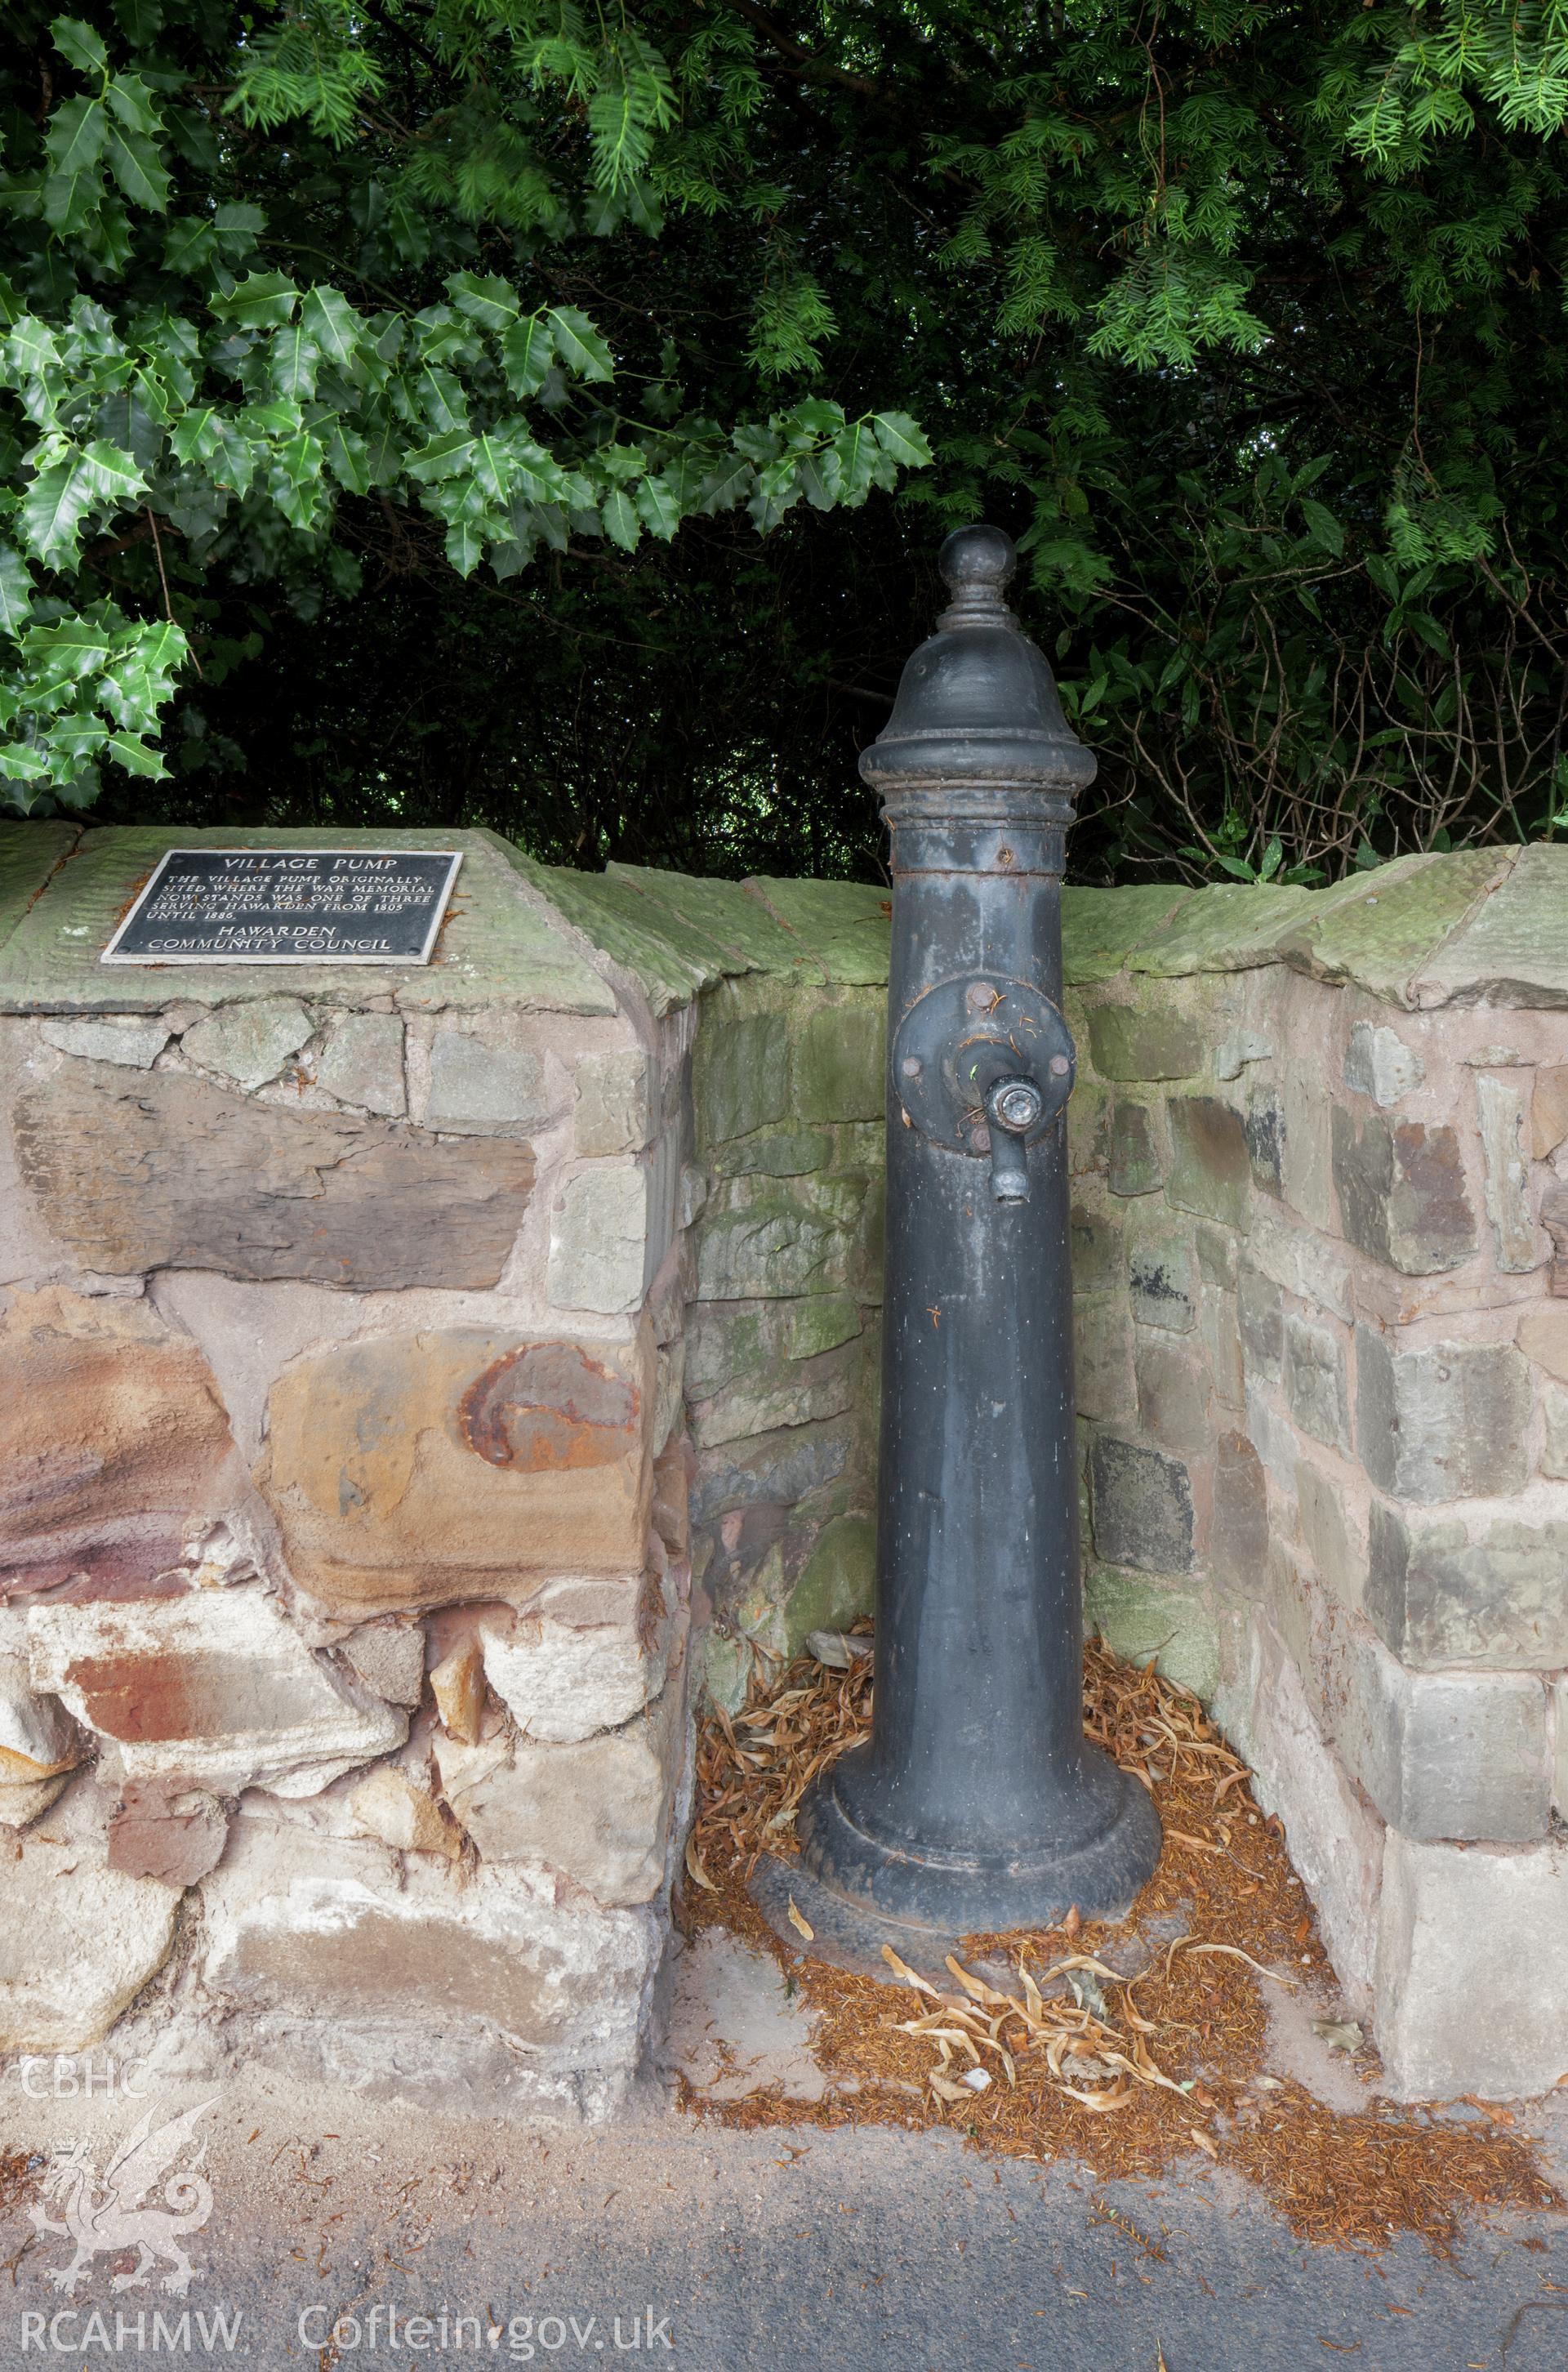 Water pump, moved for the erection of the memorial